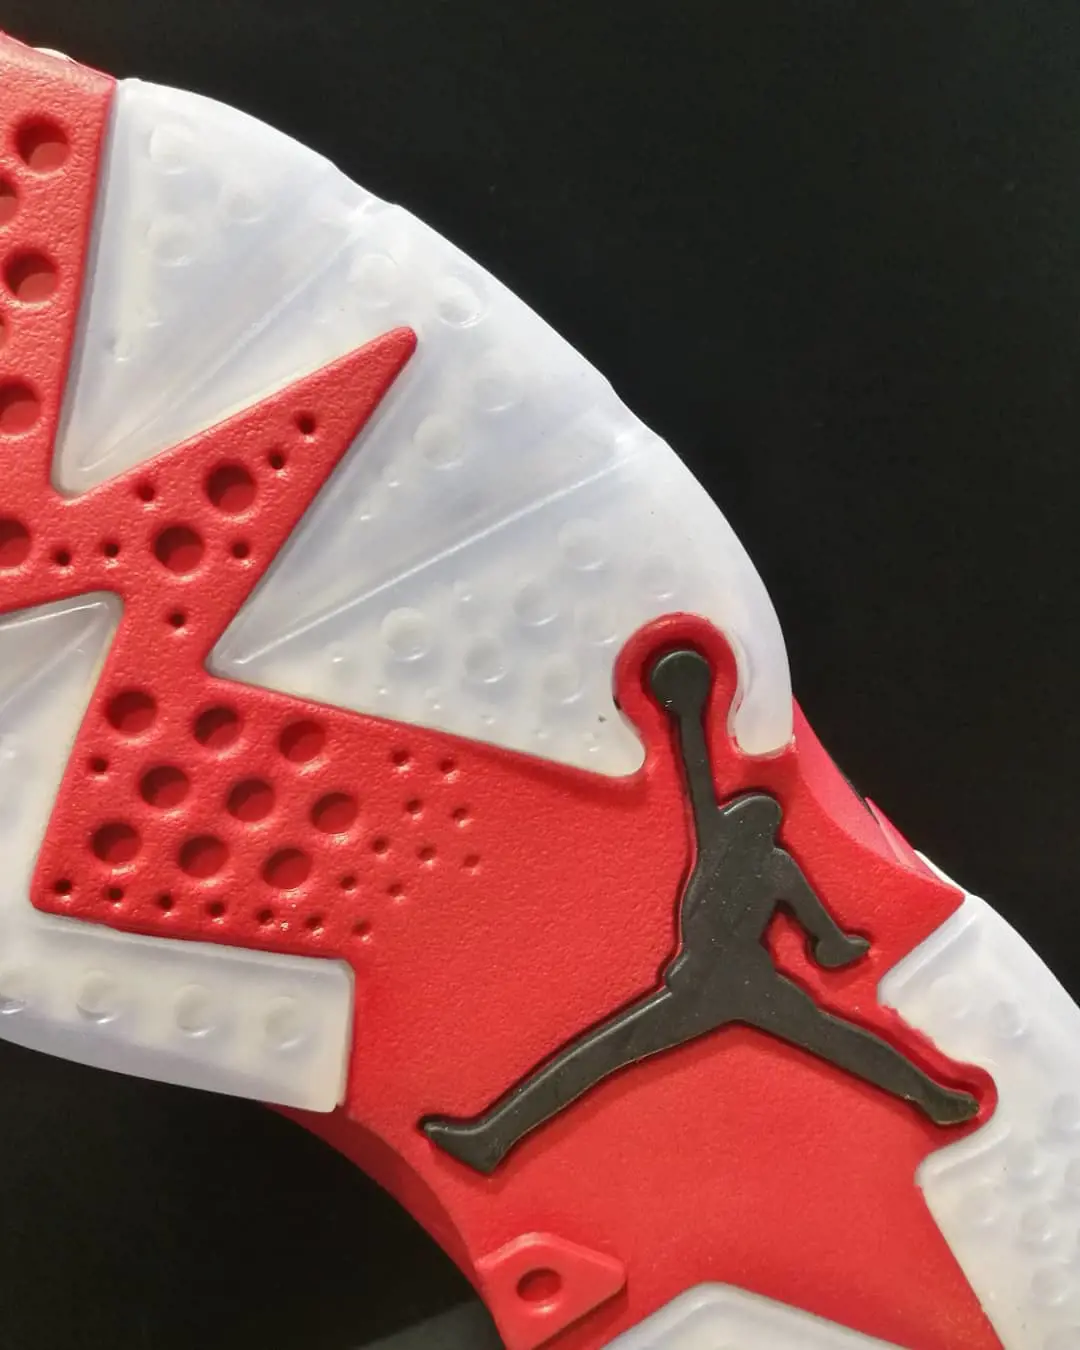 It features jumpman logo on the back of outsole